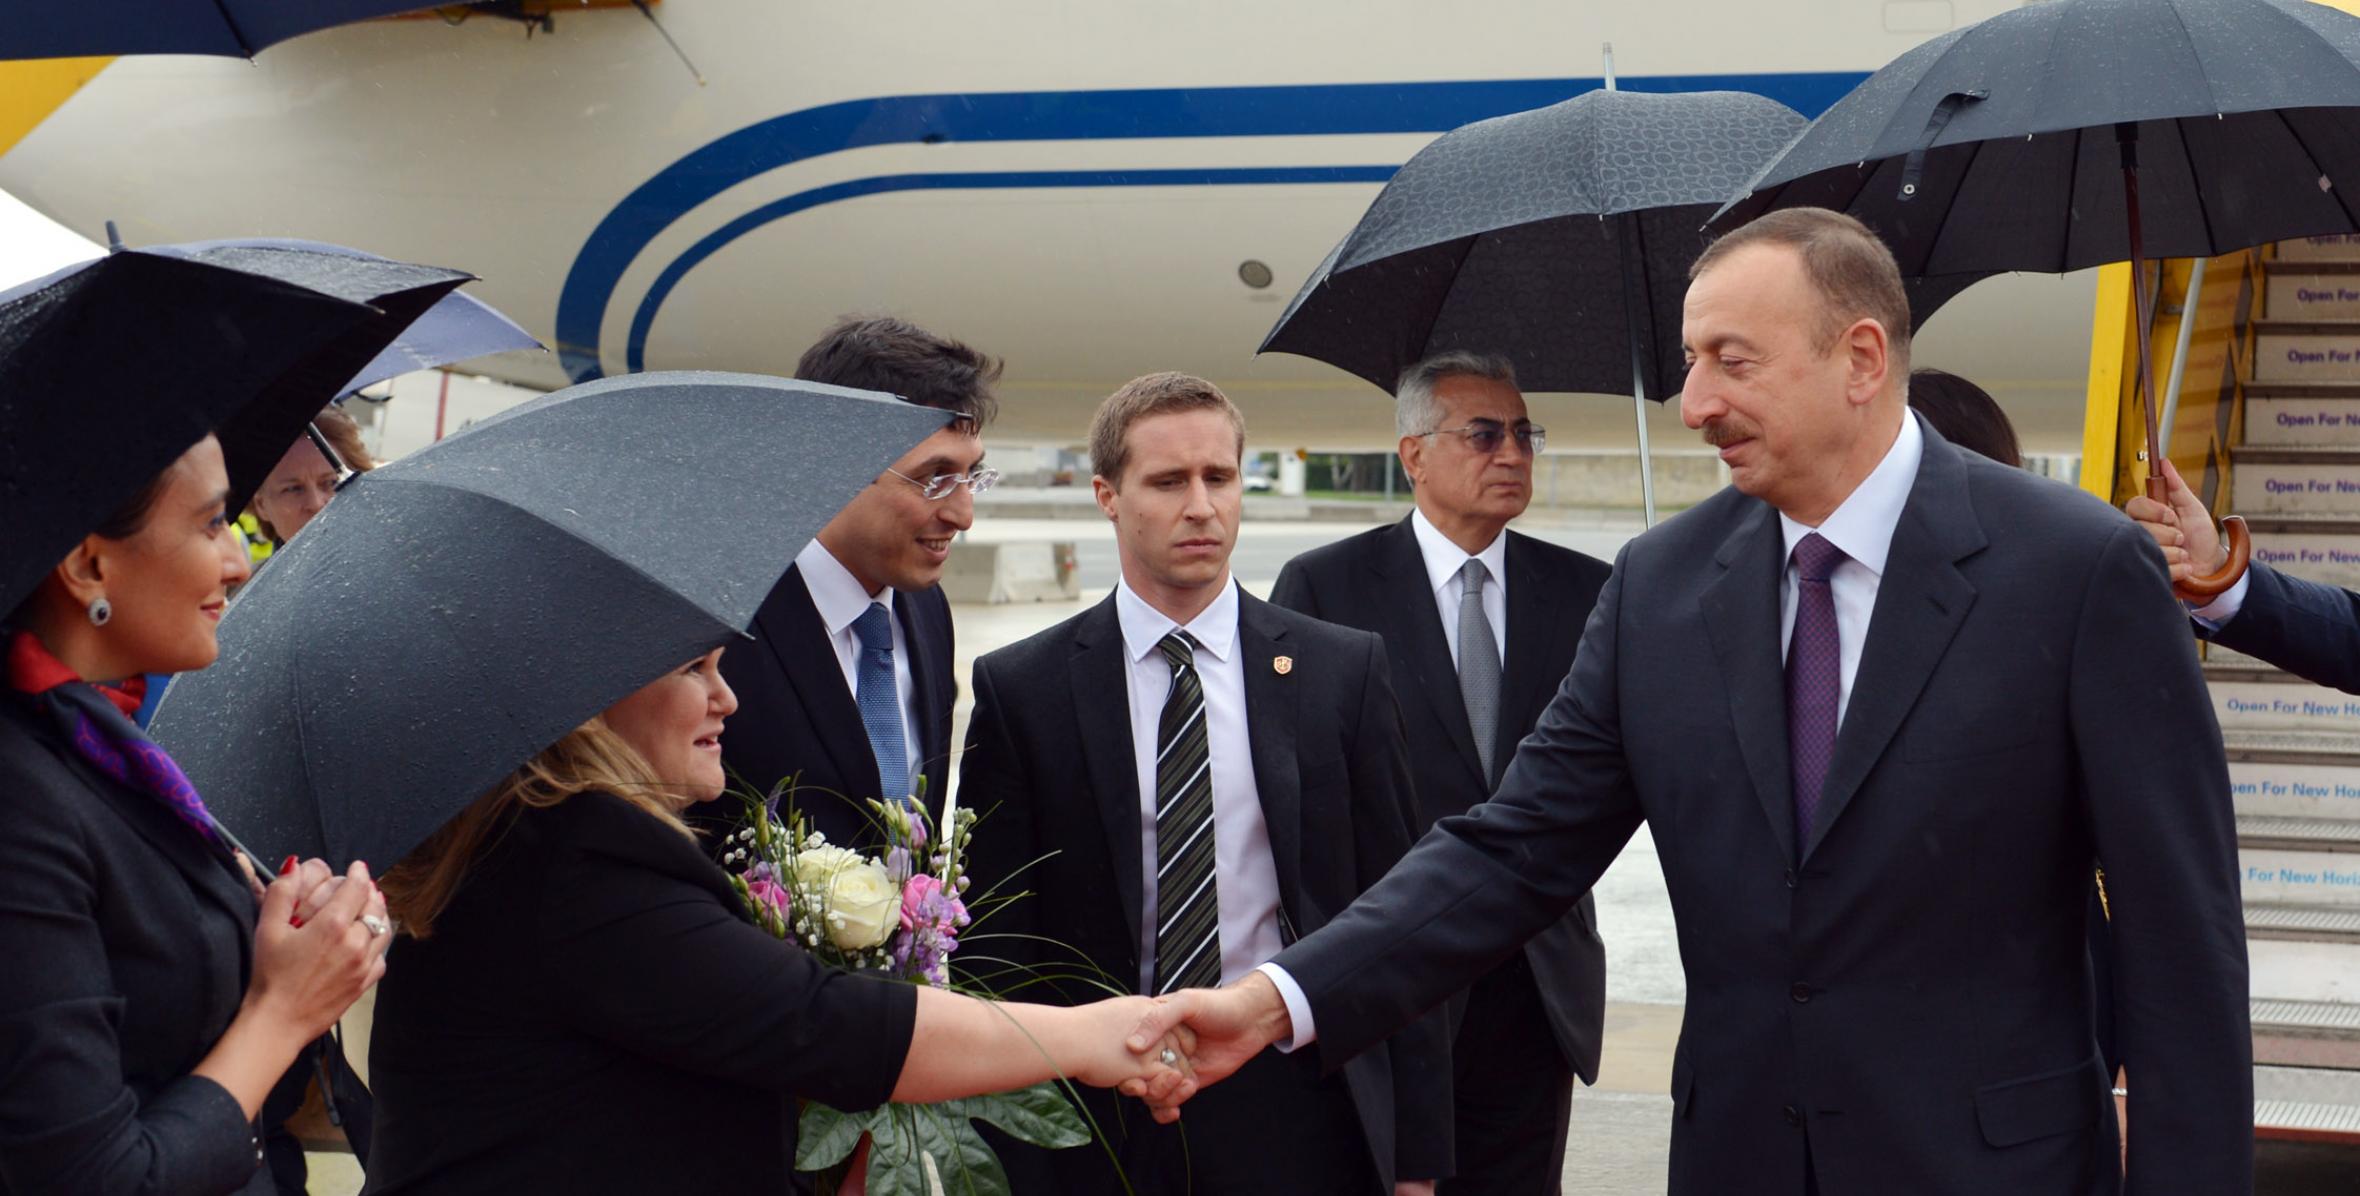 Ilham Aliyev arrived in the Republic of Austria on an official visit